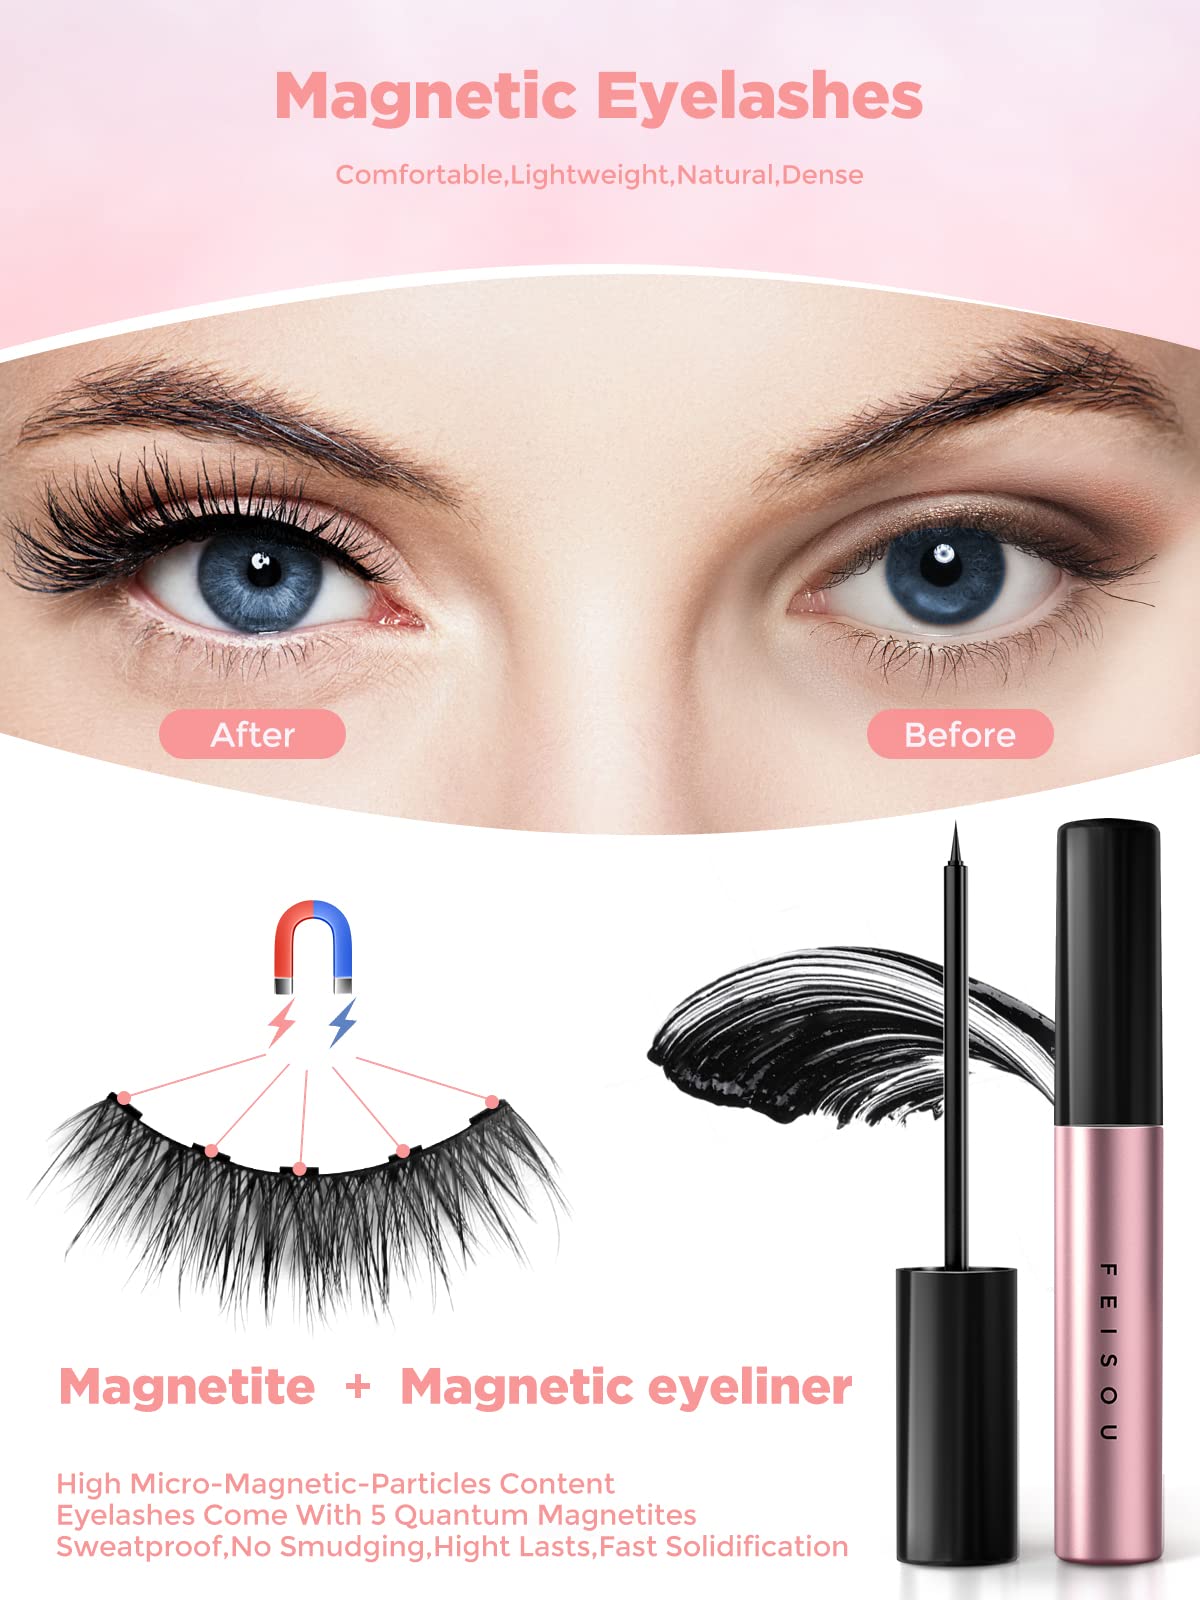 Magnetic Eyelashes with Eyeliner Kit, (5-Pairs) Reusable Magnetic Eyelashes, Magnetic lashes Natural Looking with Magnetic Eyeliner & Tweezers, Easy to Wear-No Glue Needed